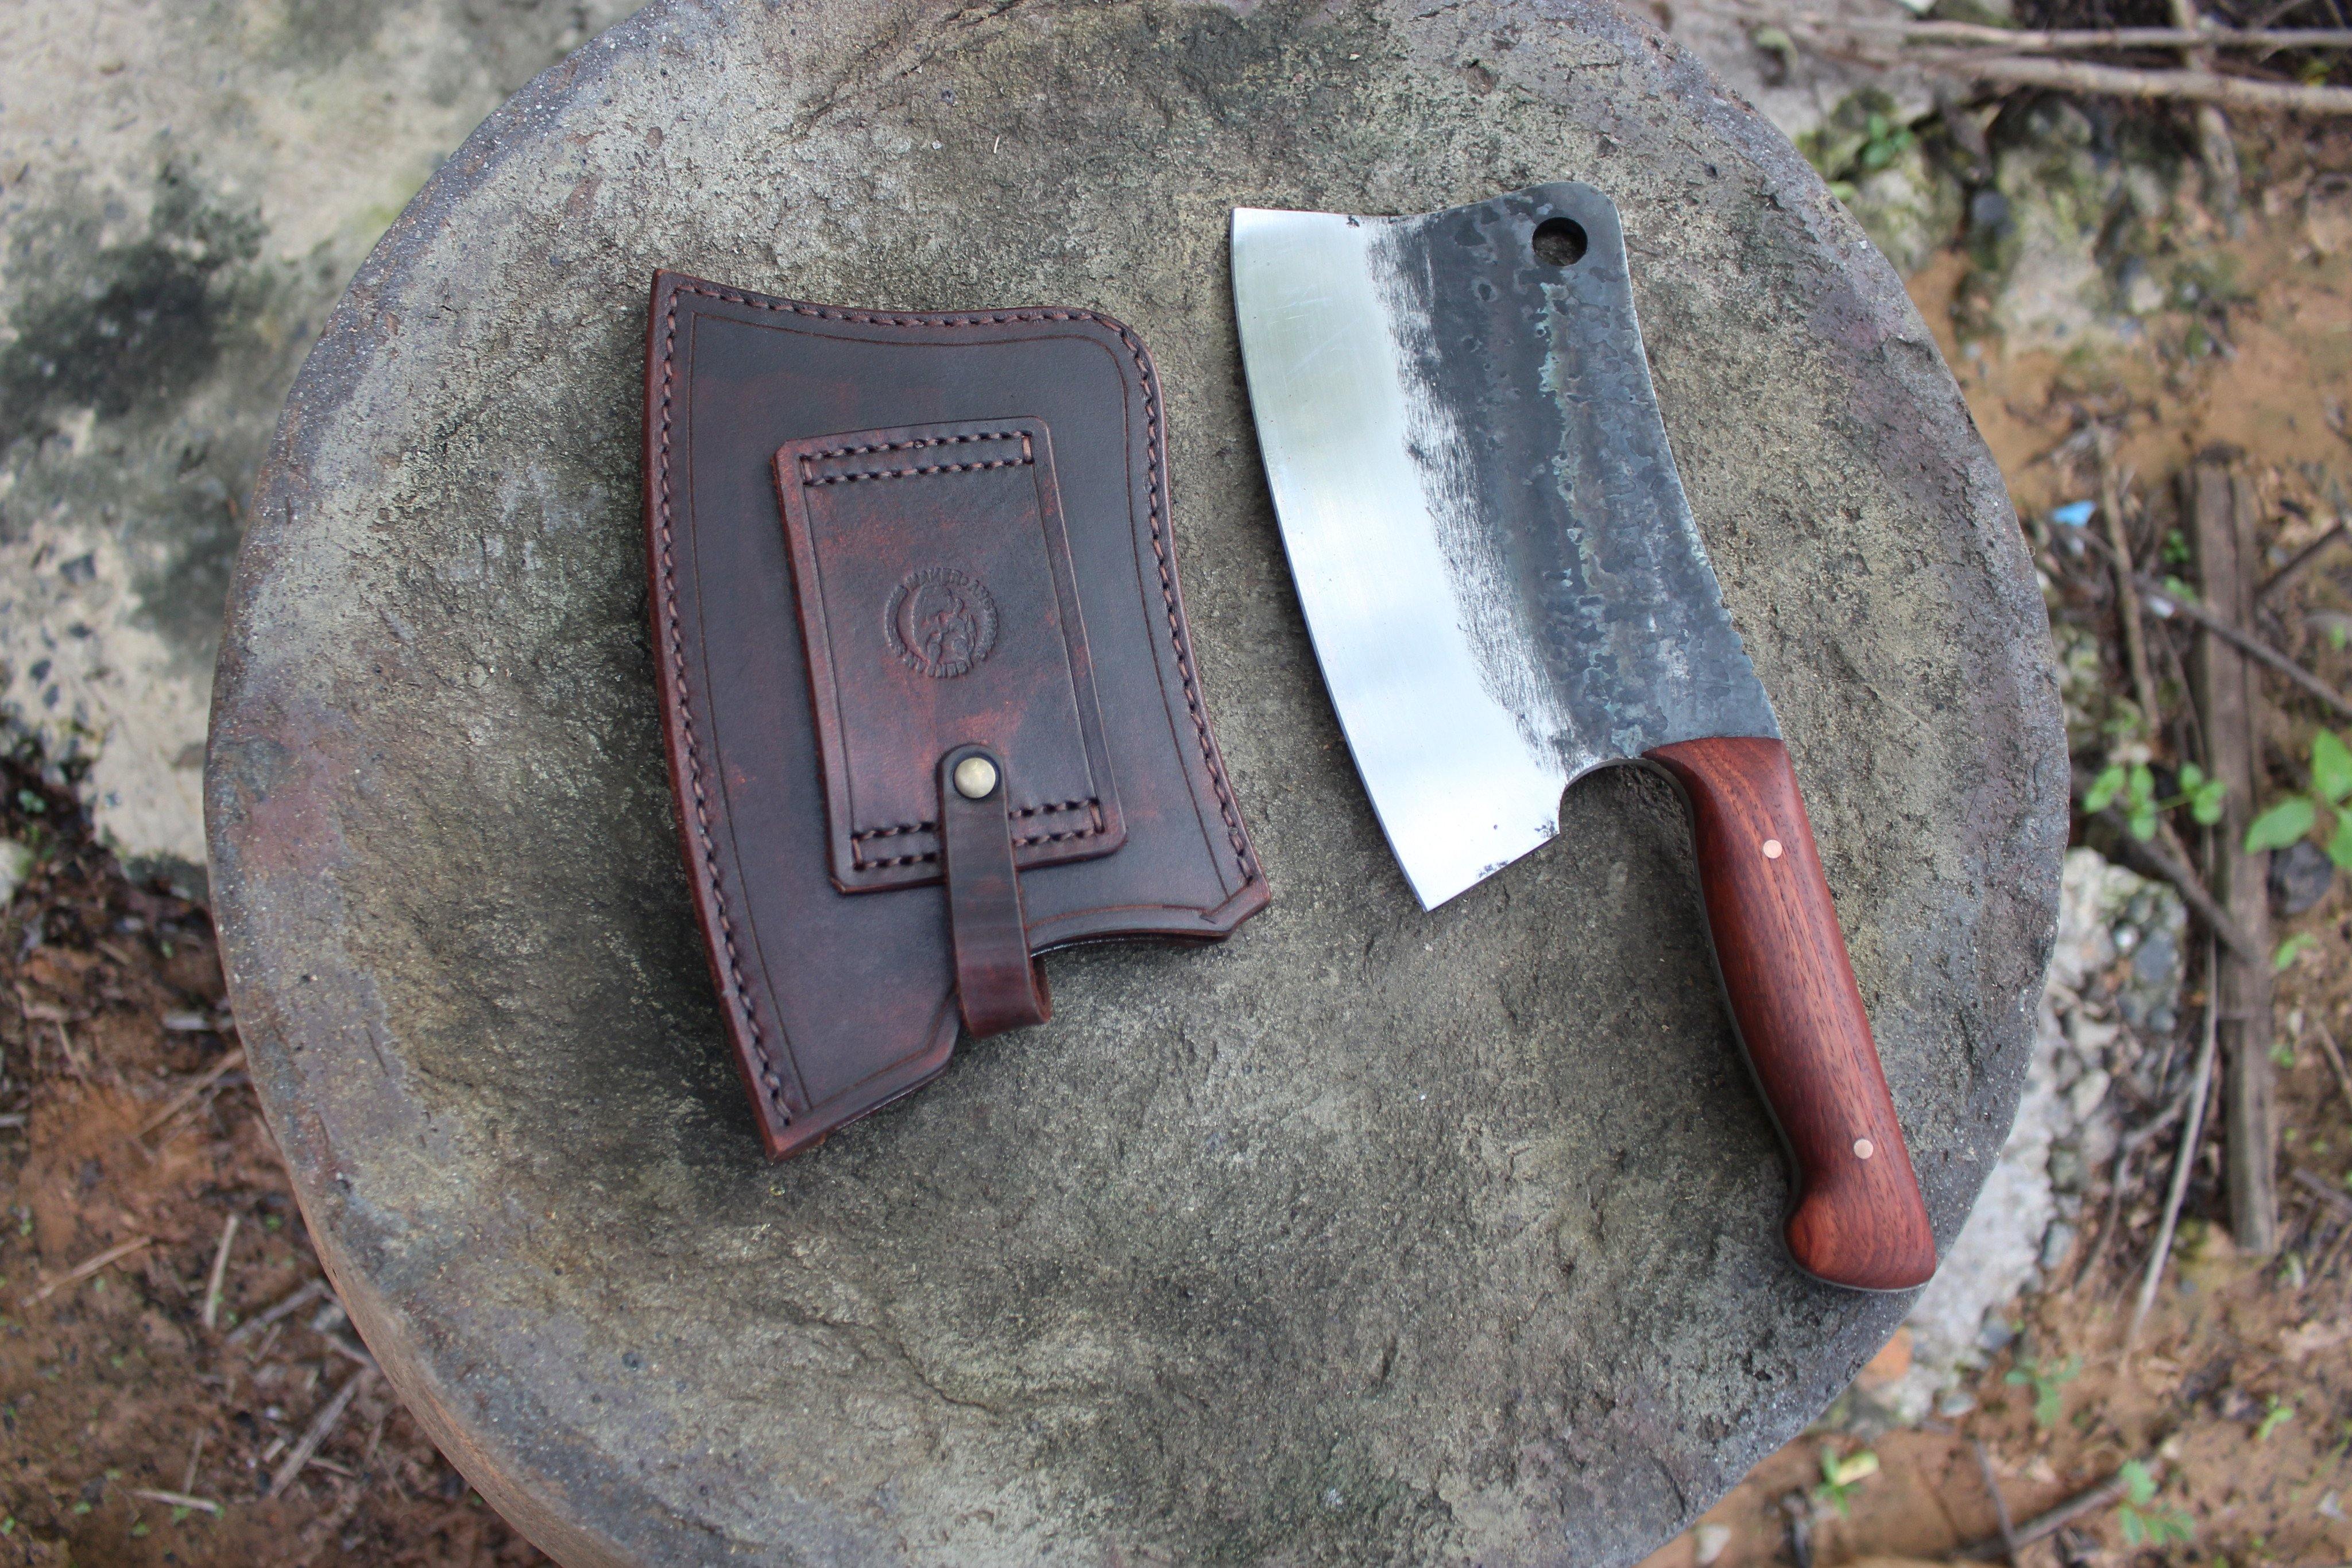 Hand Forged Cleaver Knife Set 